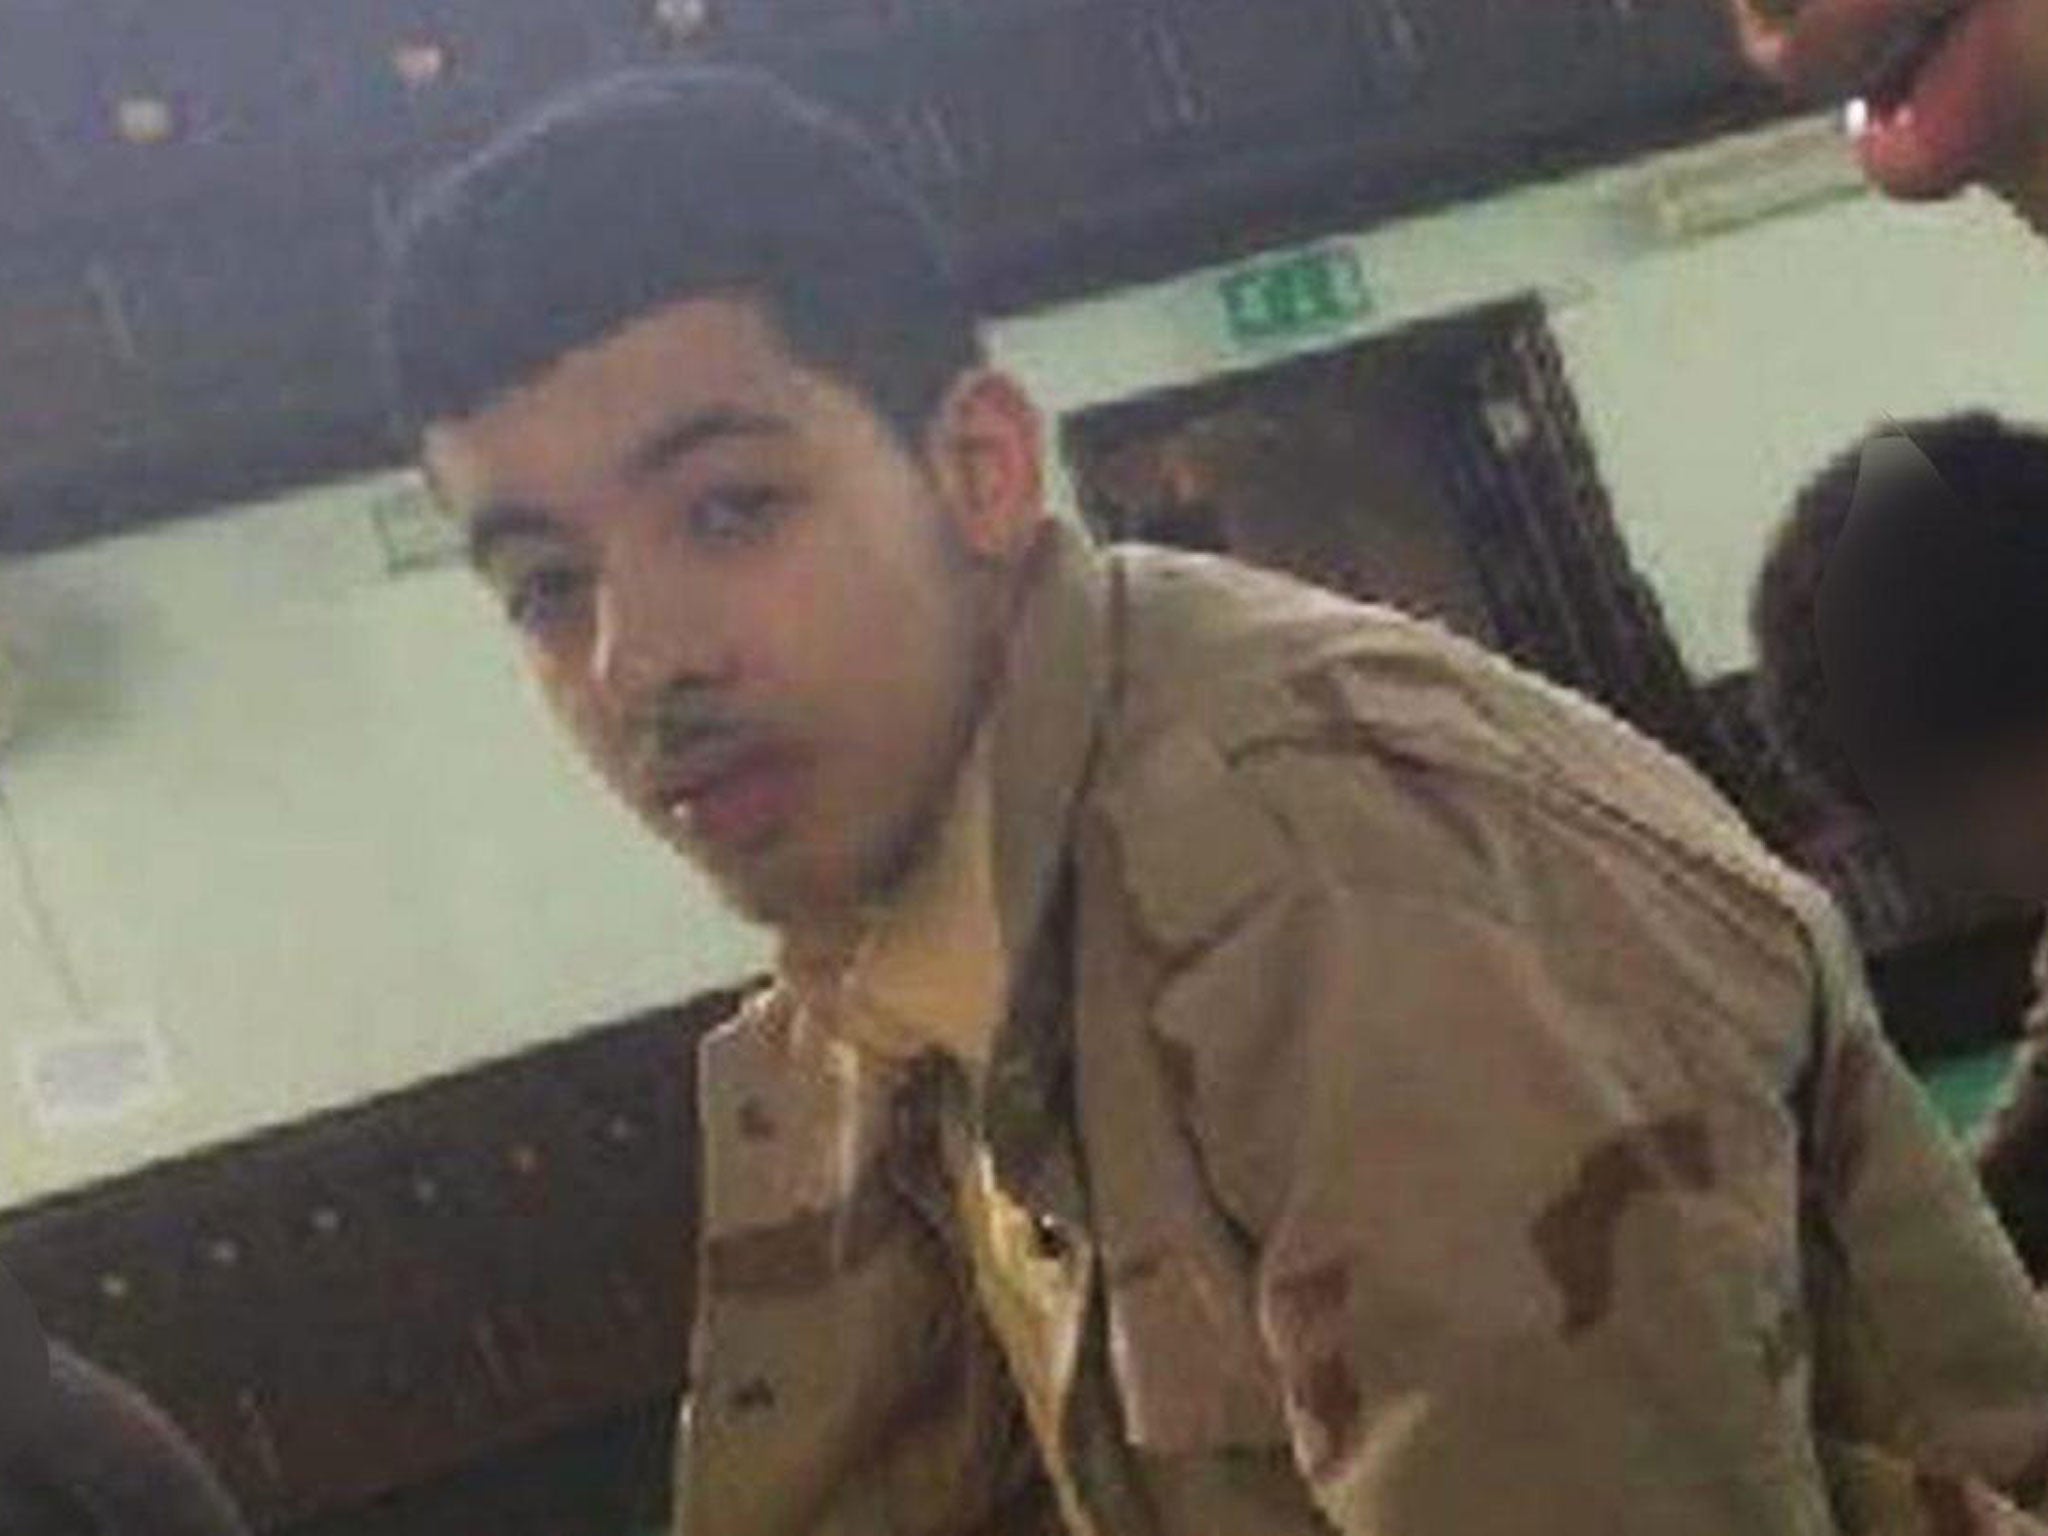 Salman Abedi dropped out of Salford University at the beginning of his second year but is believed to have received a student loan of £7,000 for the academic year